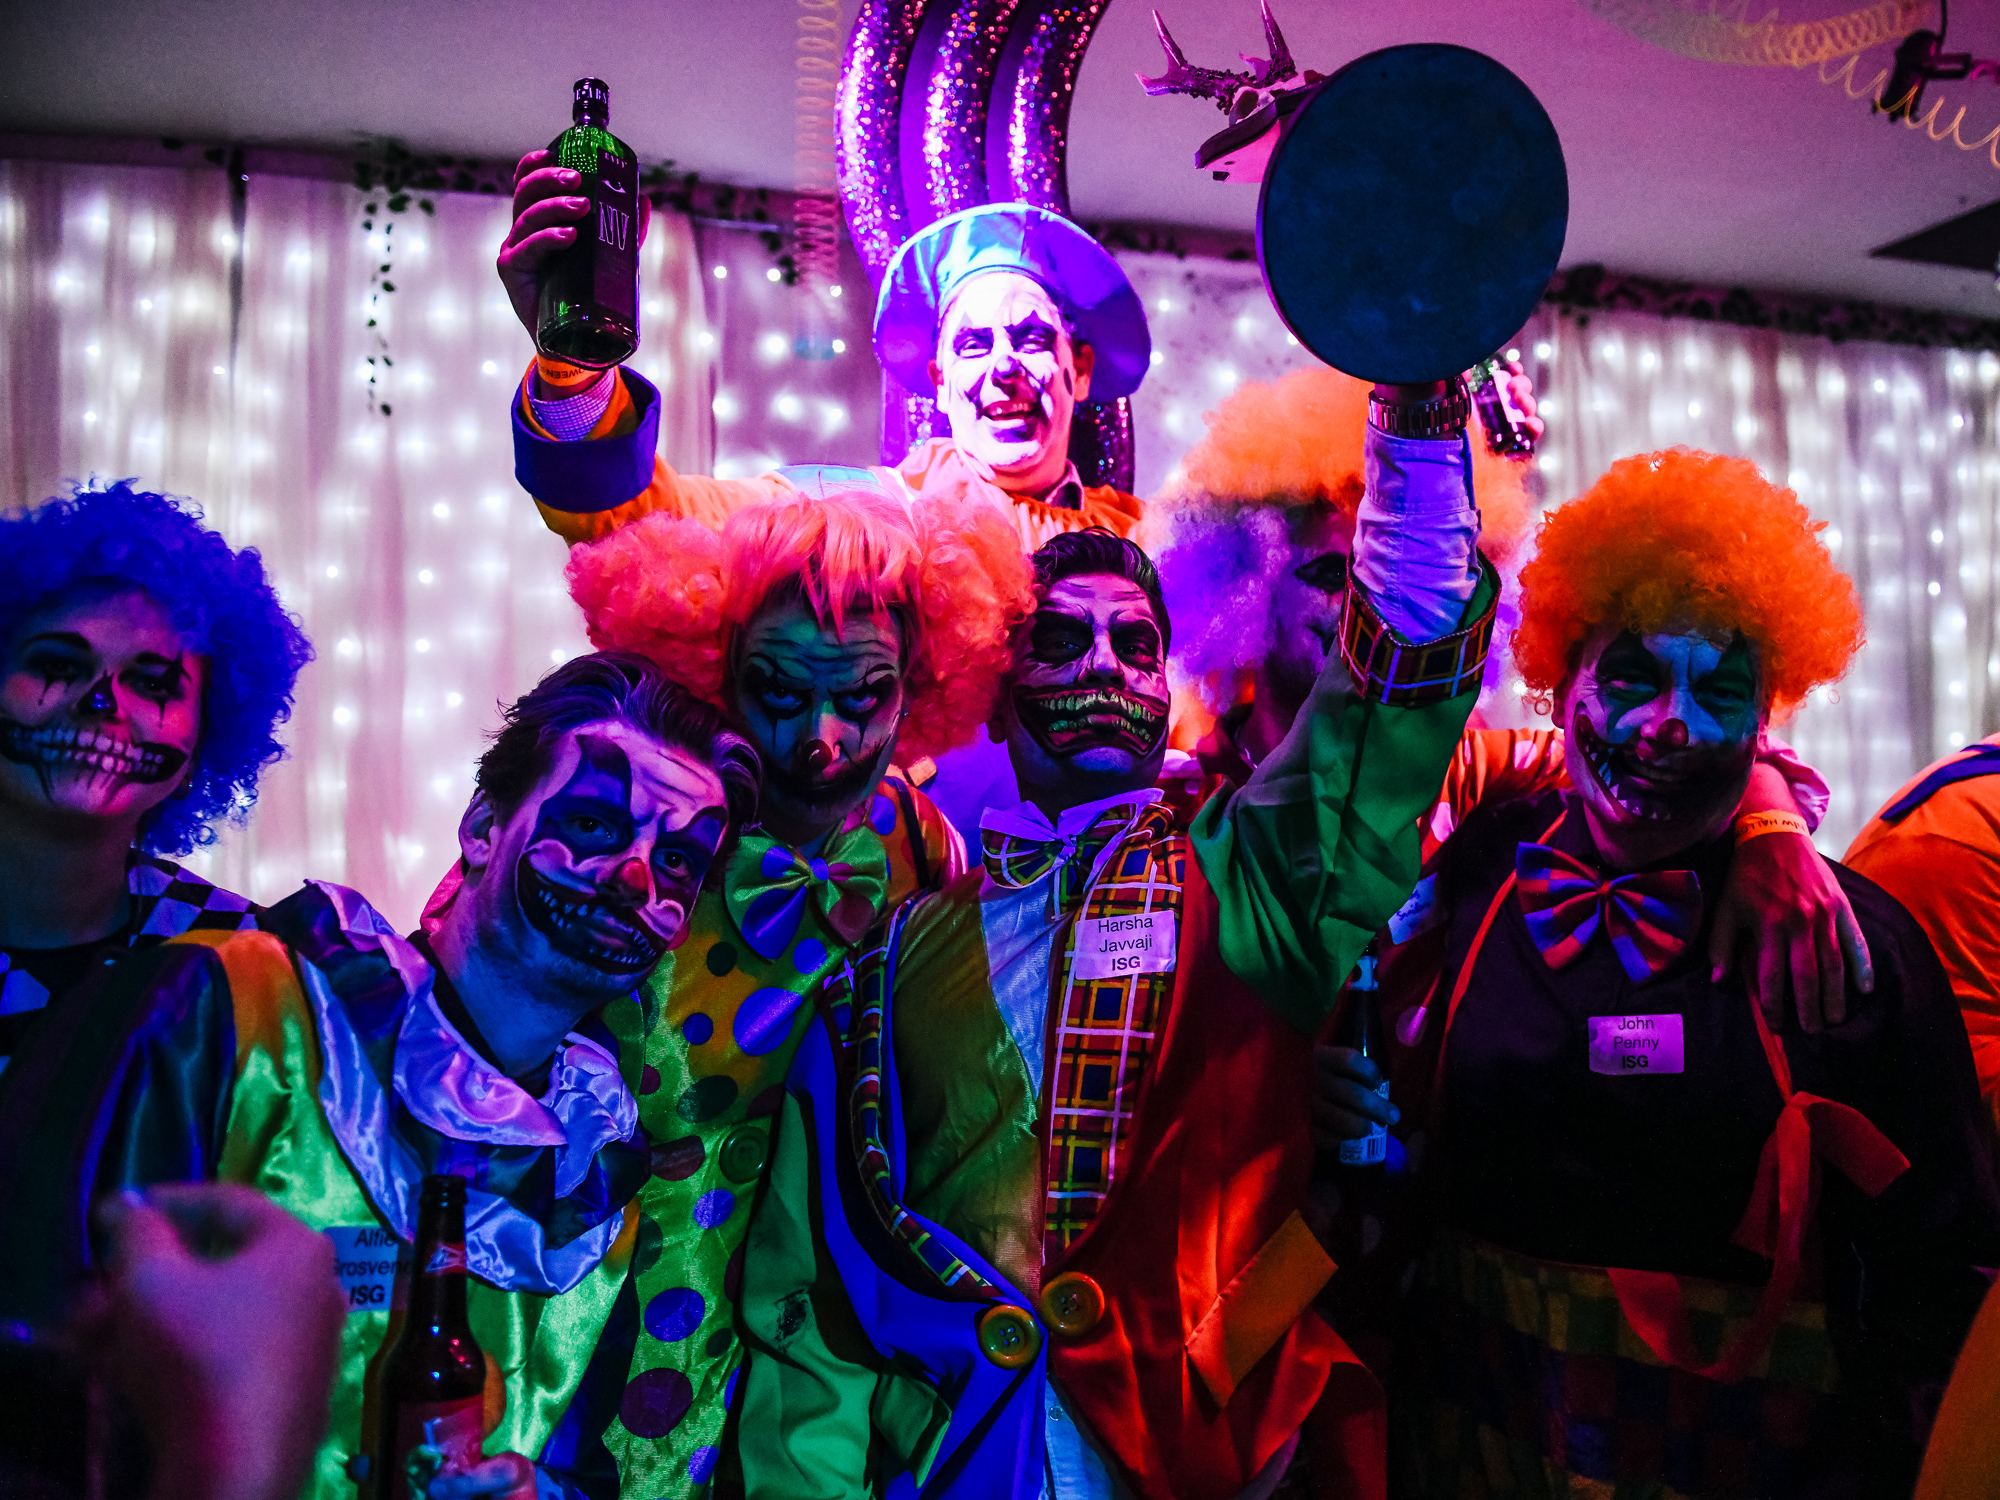 A vibrant group of people in clown costumes and skeleton face paint, celebrating with drinks in a festively lit room.